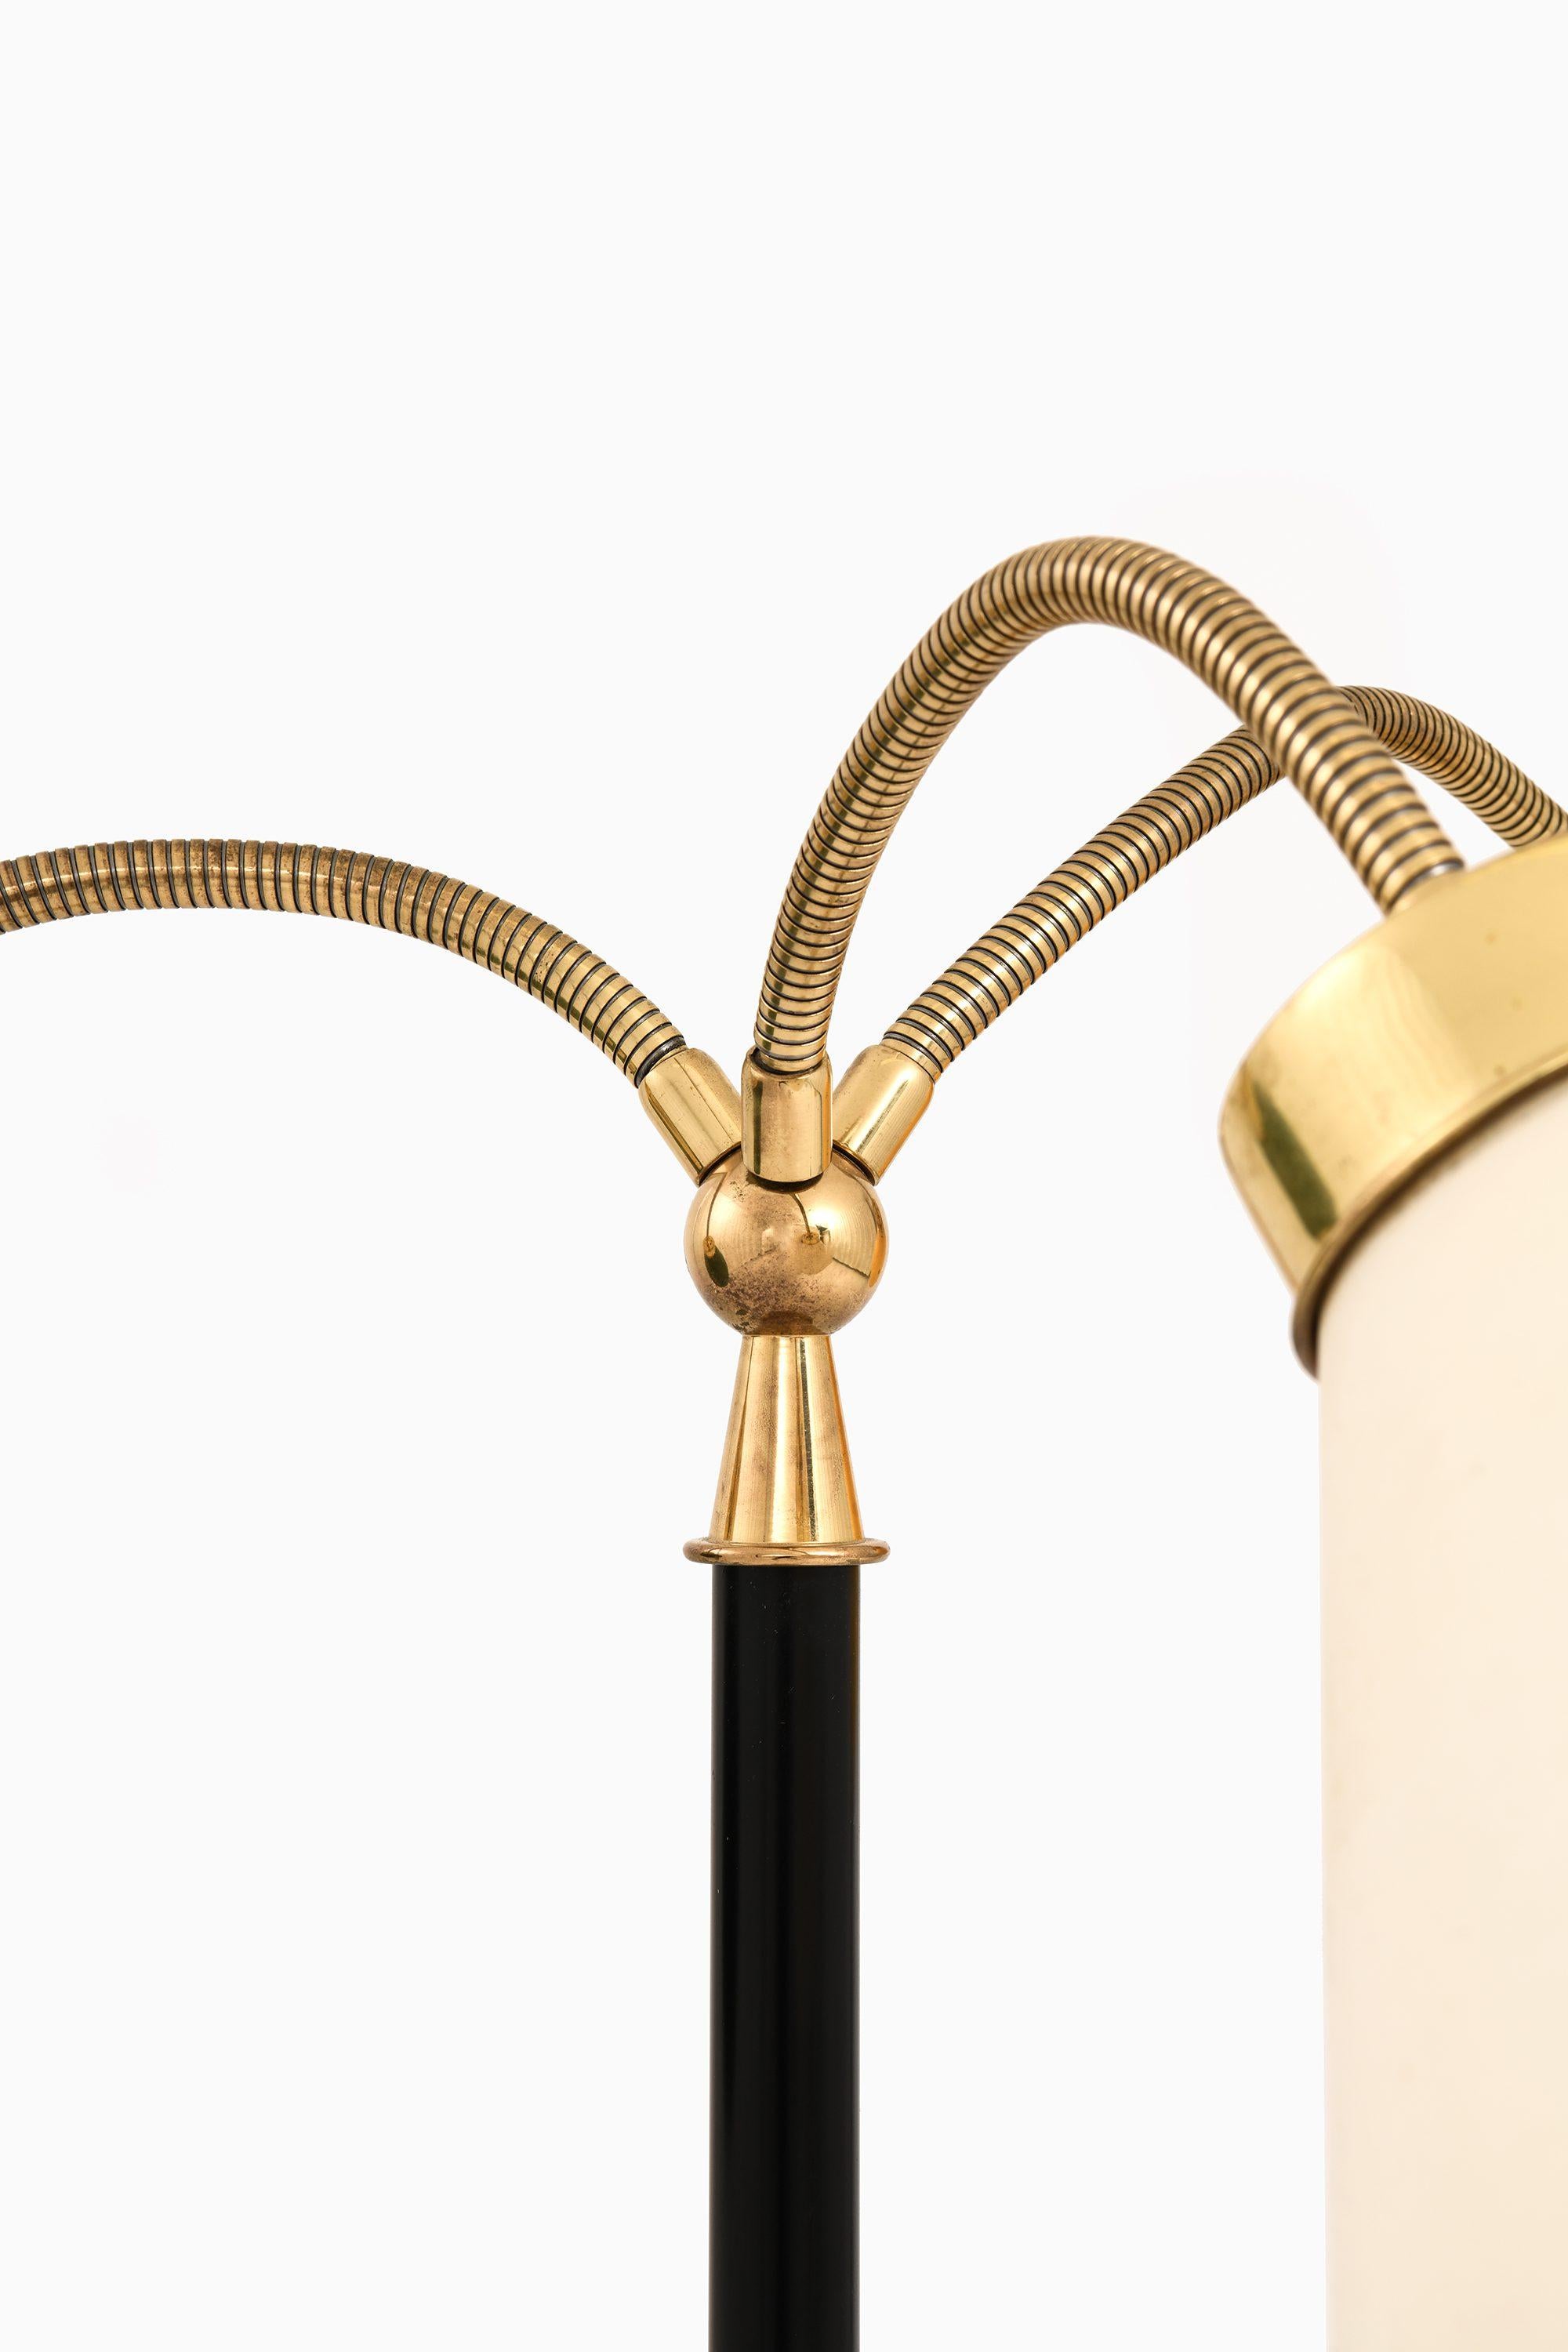 Floor Lamp in Brass, Black Lacquered Metal and Original Shades by Josef Frank, 1938

Additional Information:
Material: Brass, black lacquered metal and original shades
Style: Mid century, Scandinavian
Designed in 1938
Rare floor lamp model